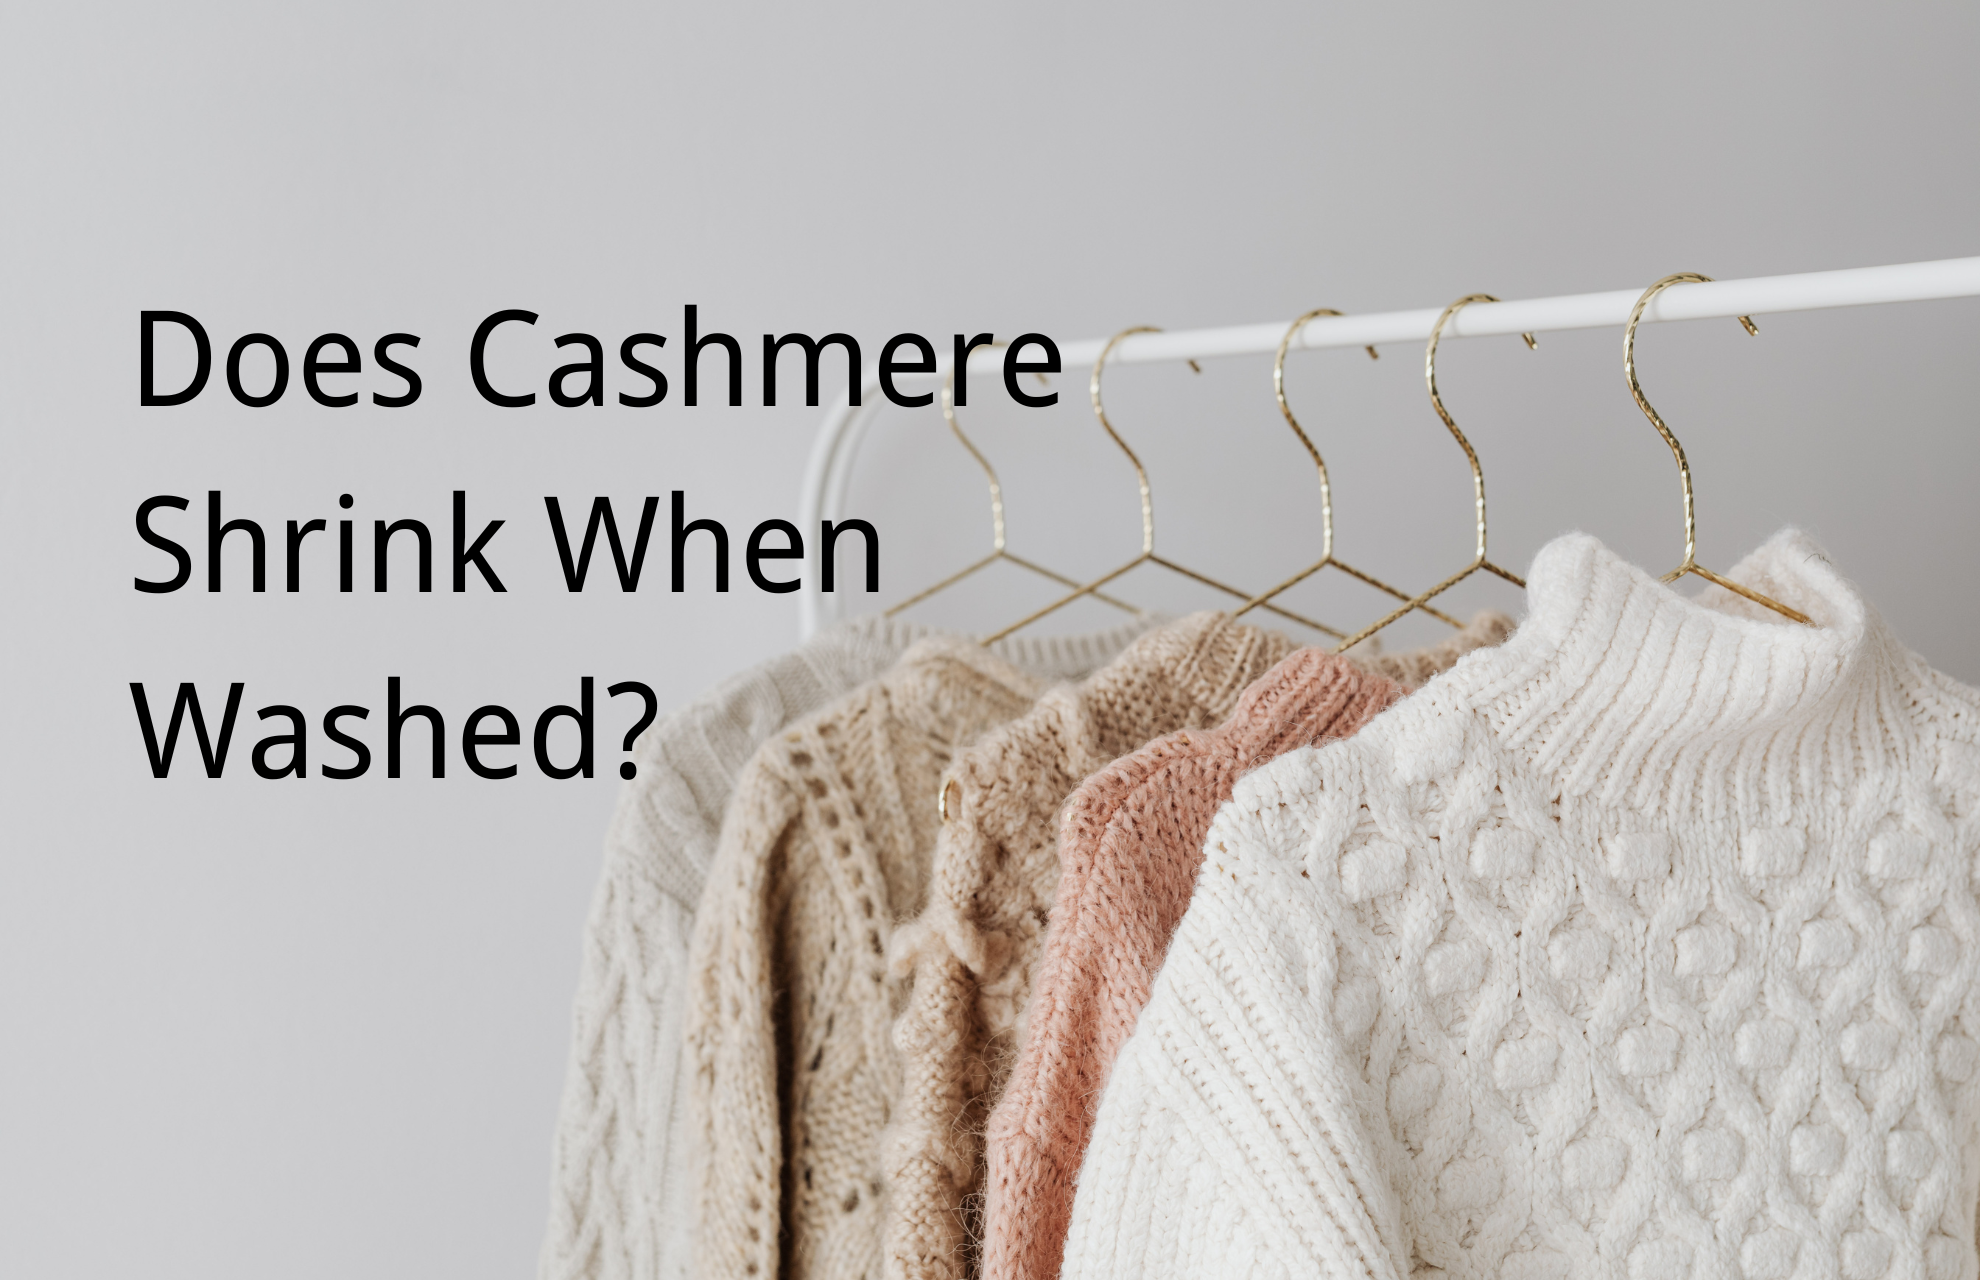 Does Cashmere Shrink When Washed? Why Does Cashmere Shrink?